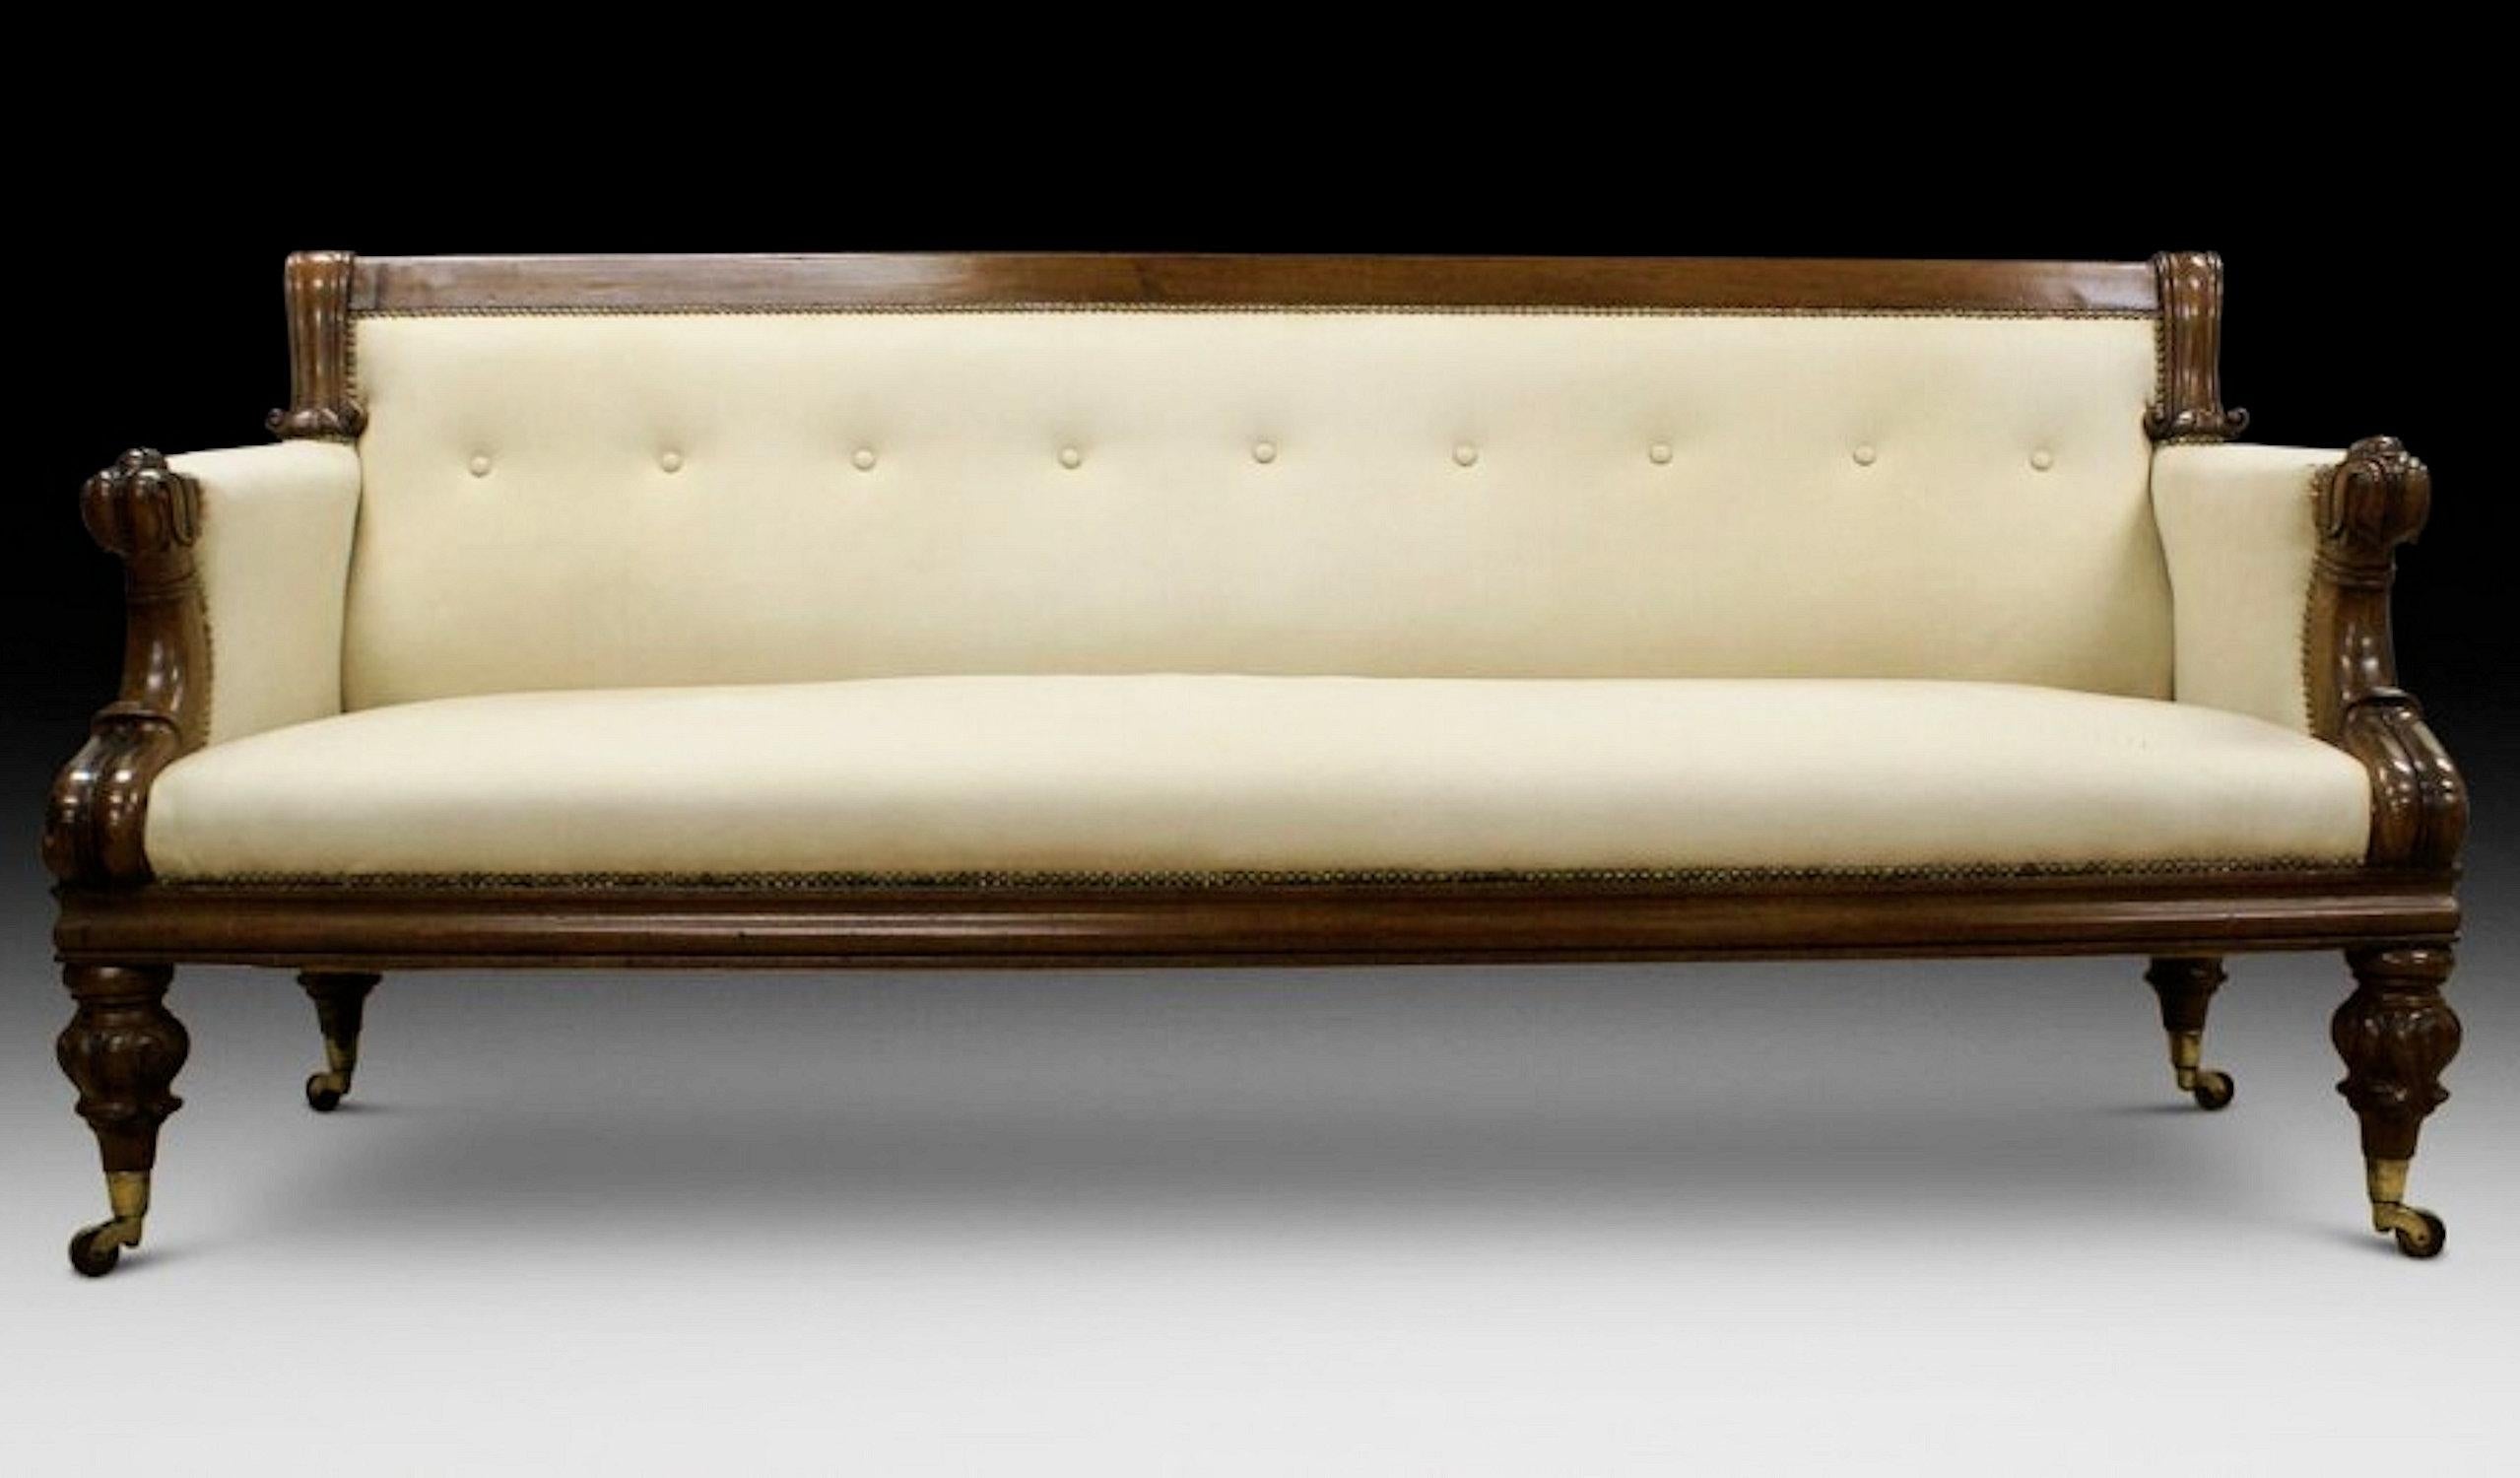 This beautiful and superb quality Victorian sofa is supported on turned and carved legs with brass cup castors and lovely carved arm supports. The sofa has been stylishly upholstered in a cream soft suede with a buttoned back, giving it a much more